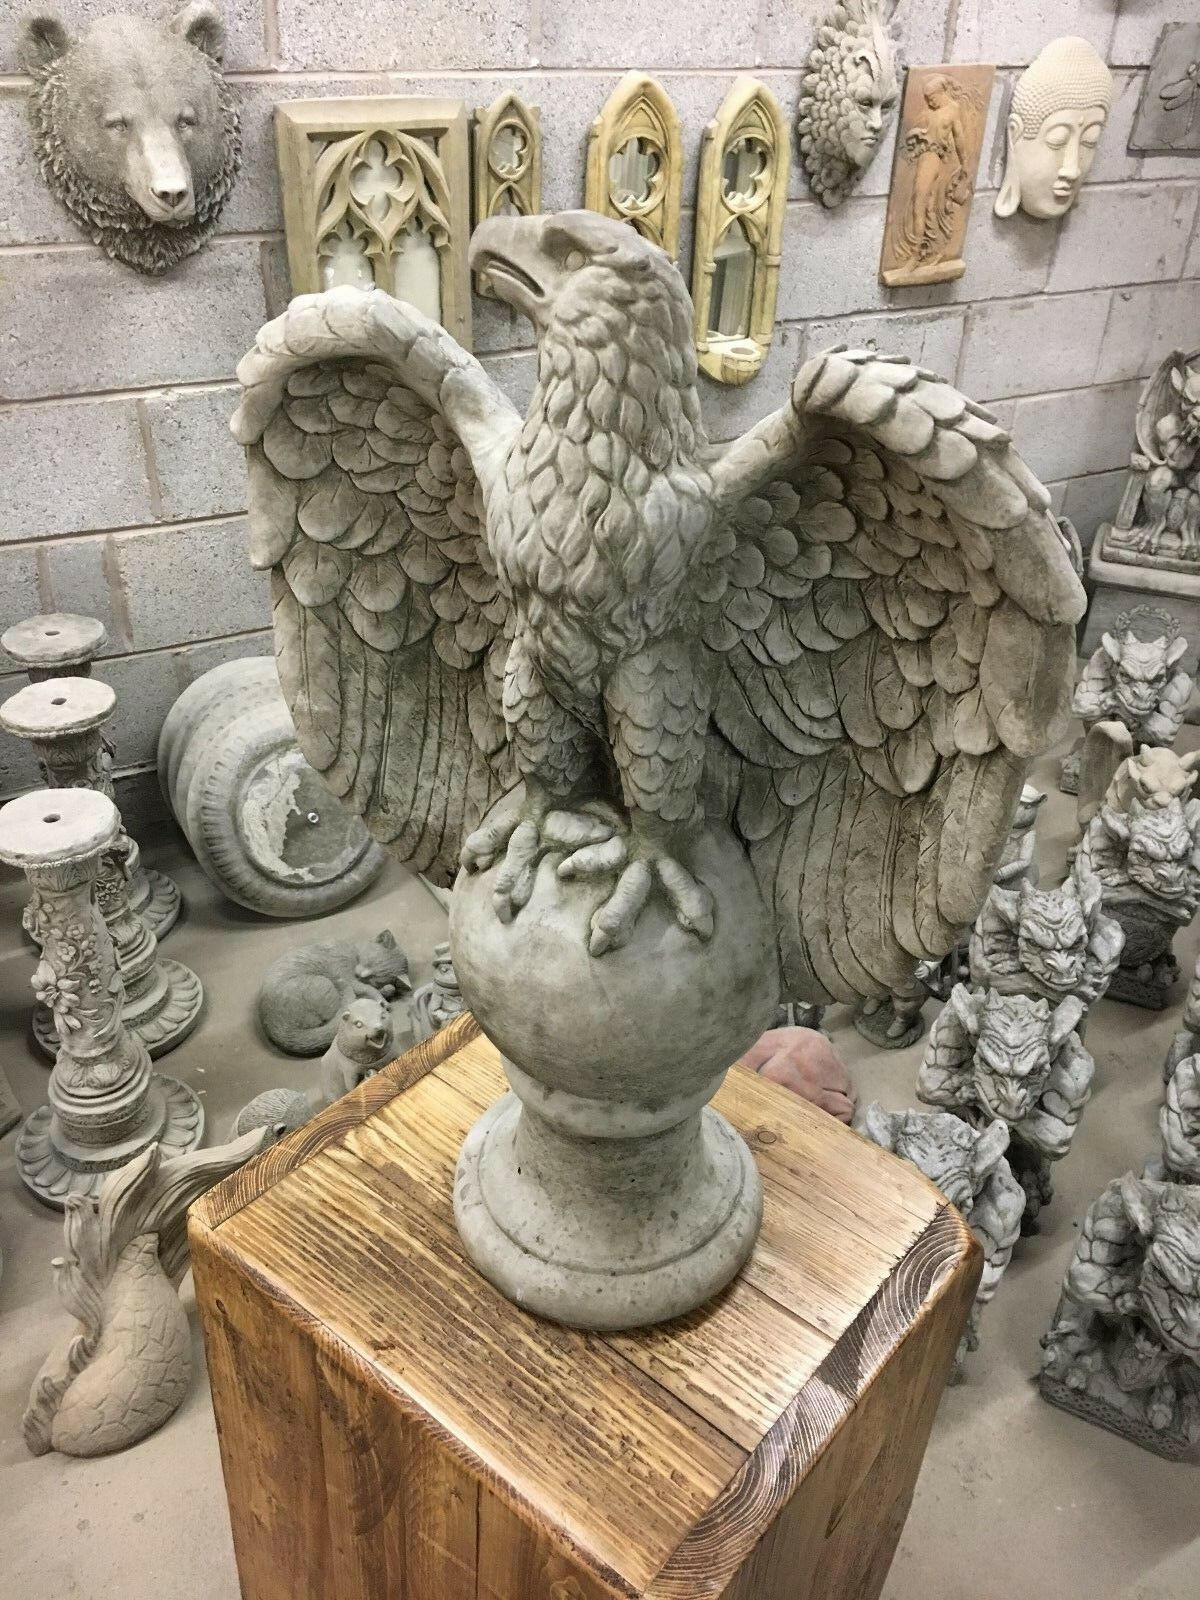 Large Stone Winged Eagle on Ball Statue